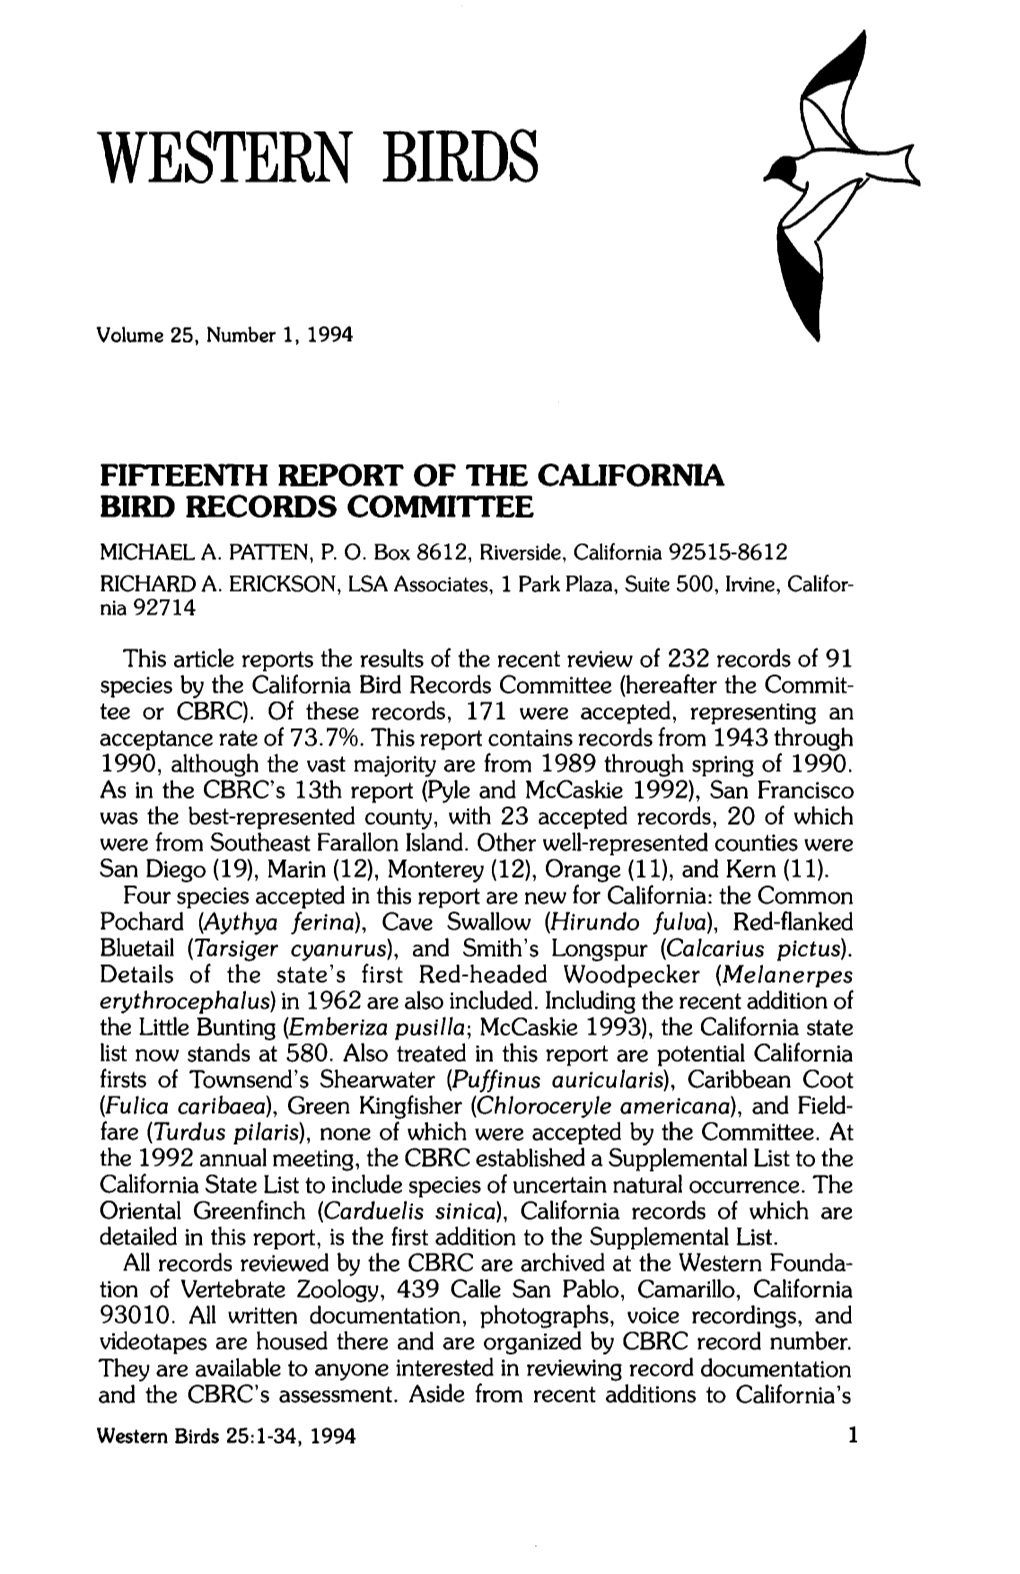 Fifteenth Report of the California Bird Records Committee